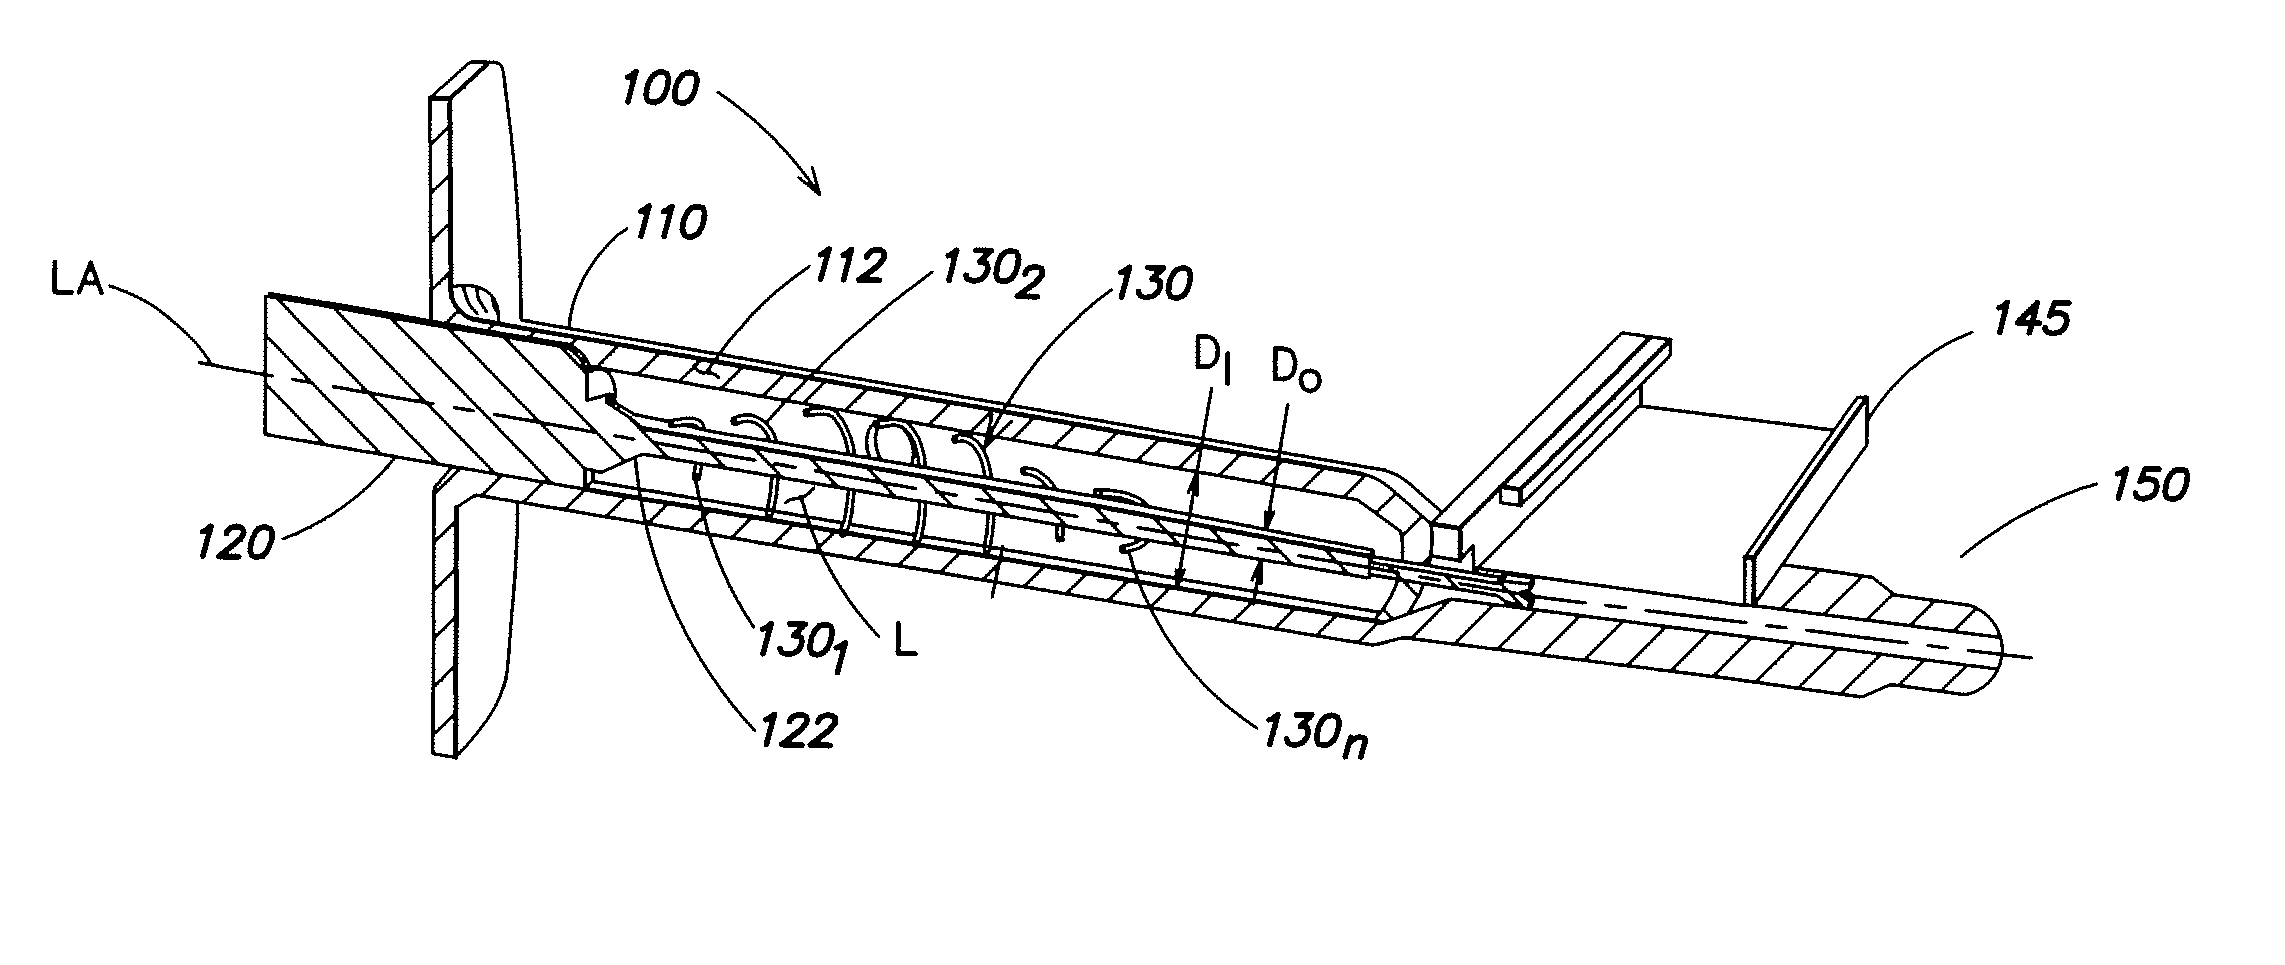 Intraocular lens injector including a shaped spring